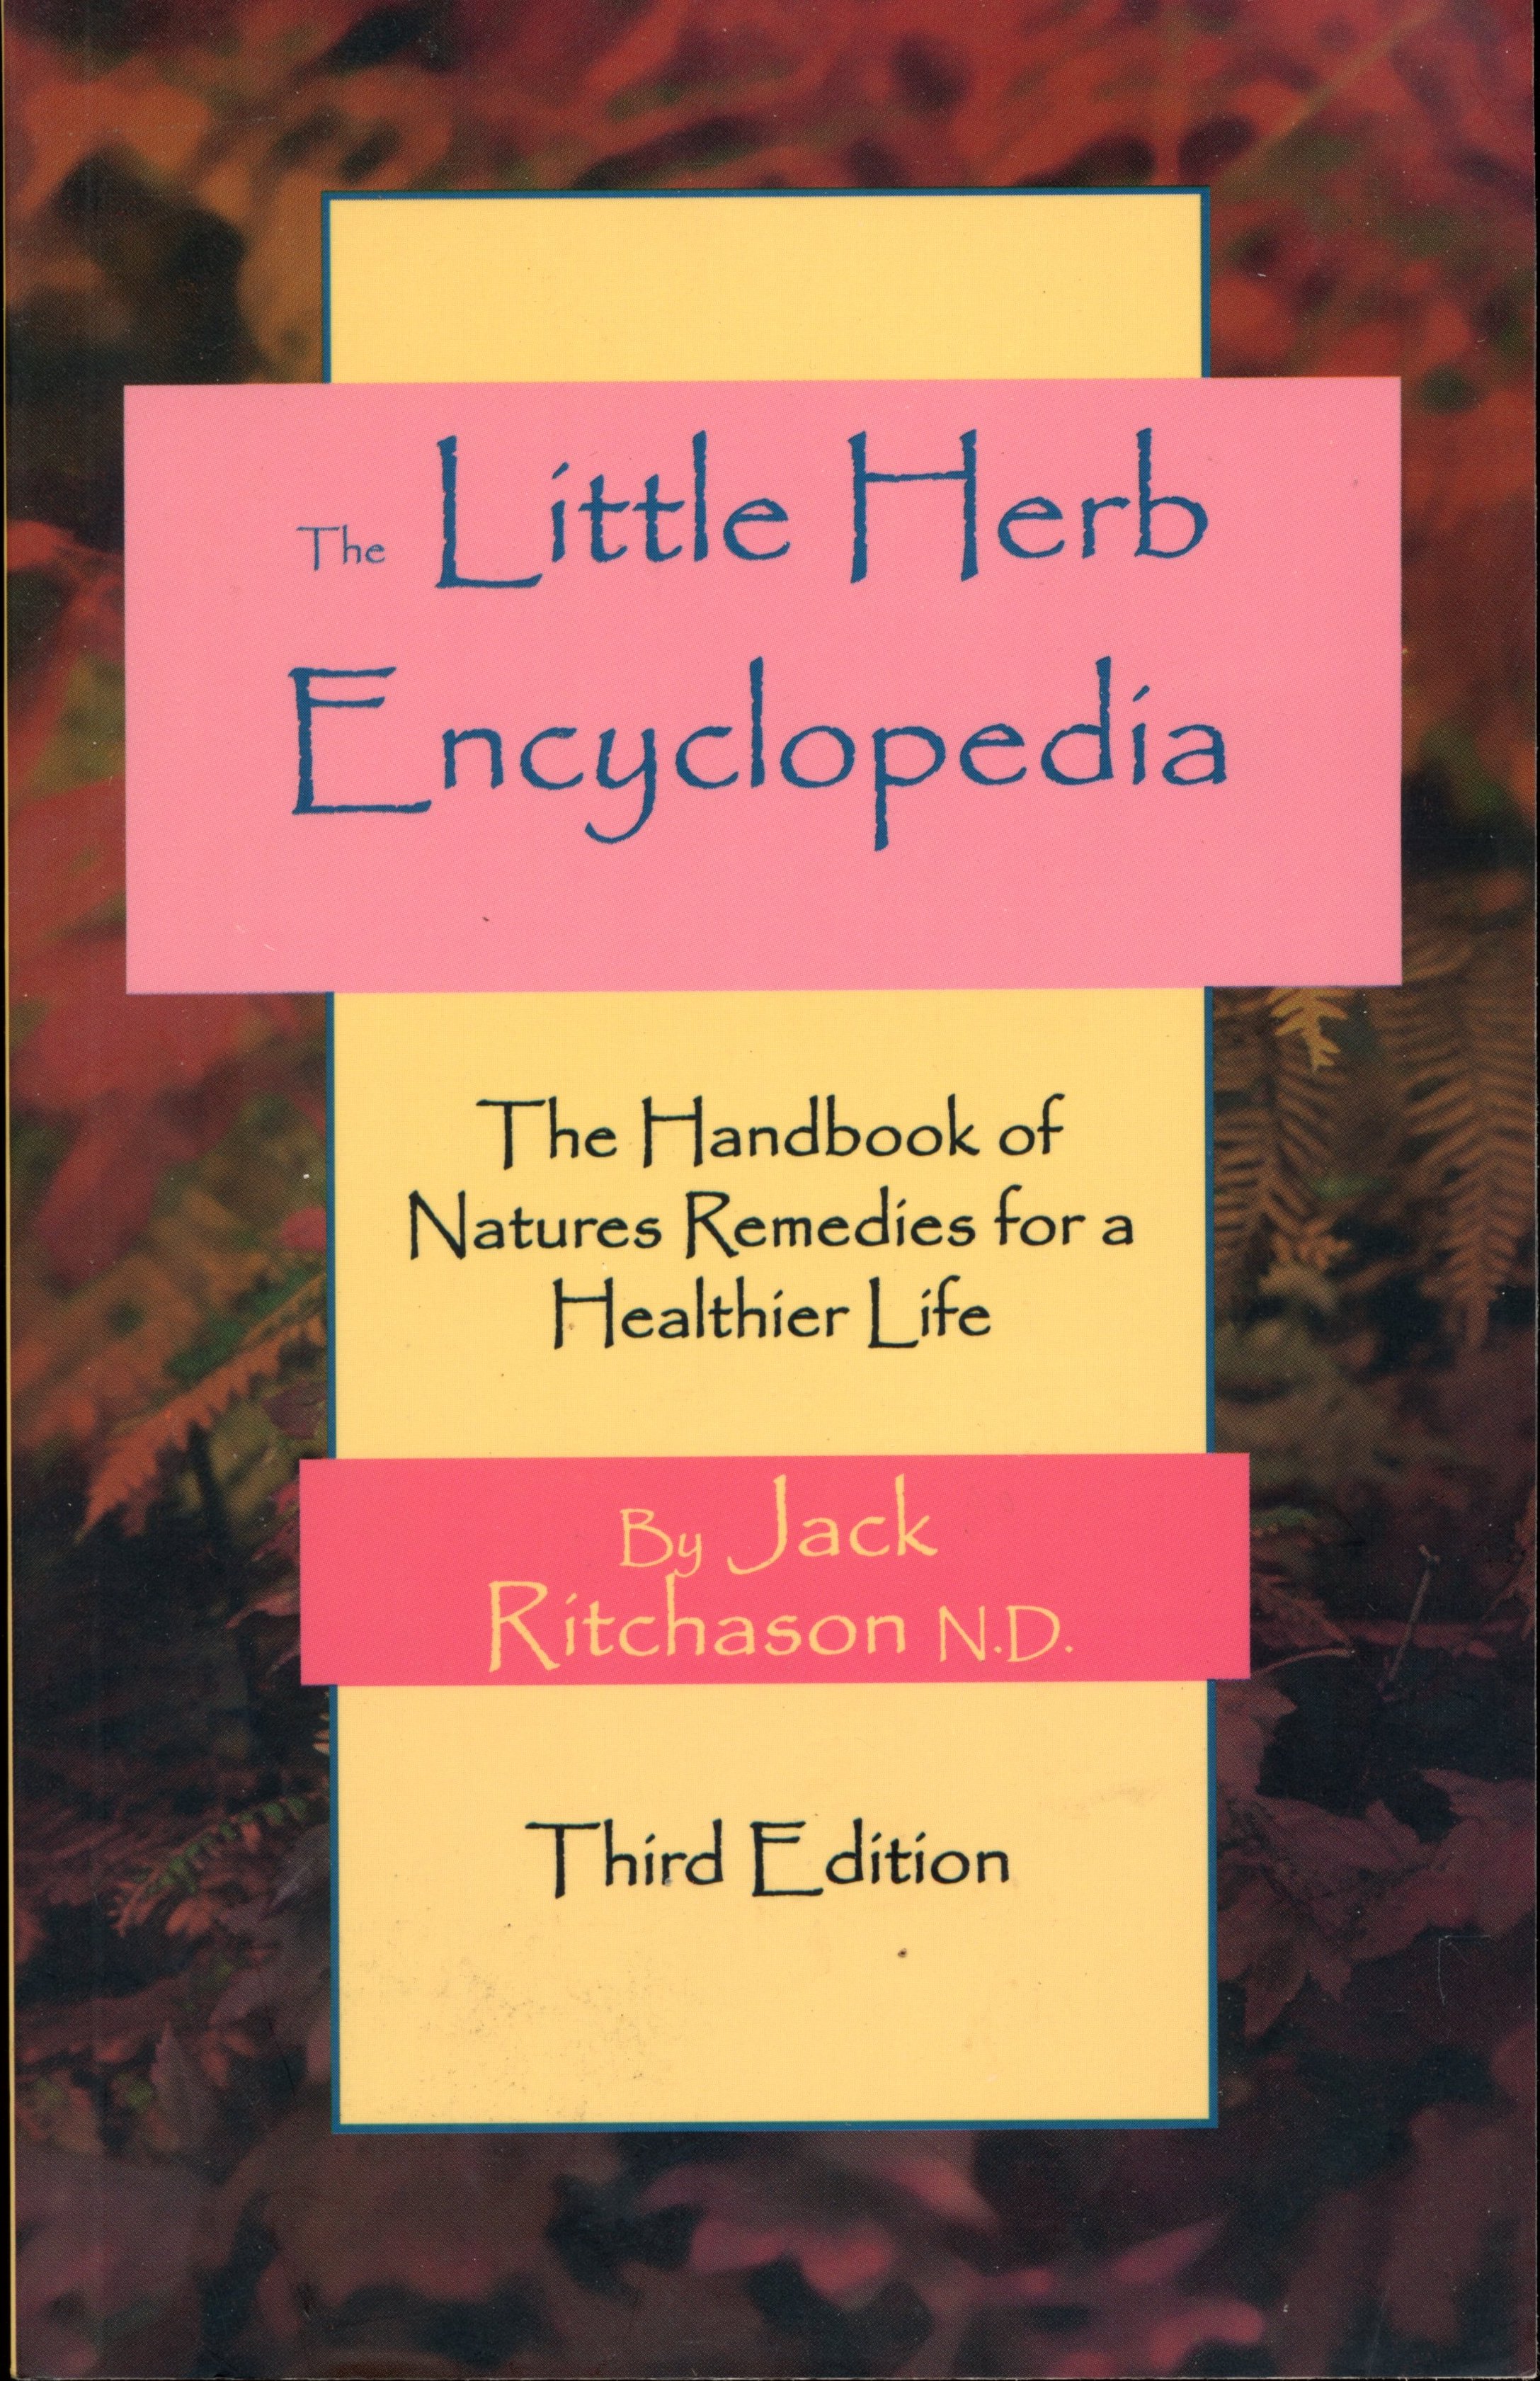 The Little Herb Encyclopedia - The Handbook of Natures Remedies for a Healthier Life - Jack Ritchason N.D. - 1995 - Paperback - Woodland Publishing Inc.